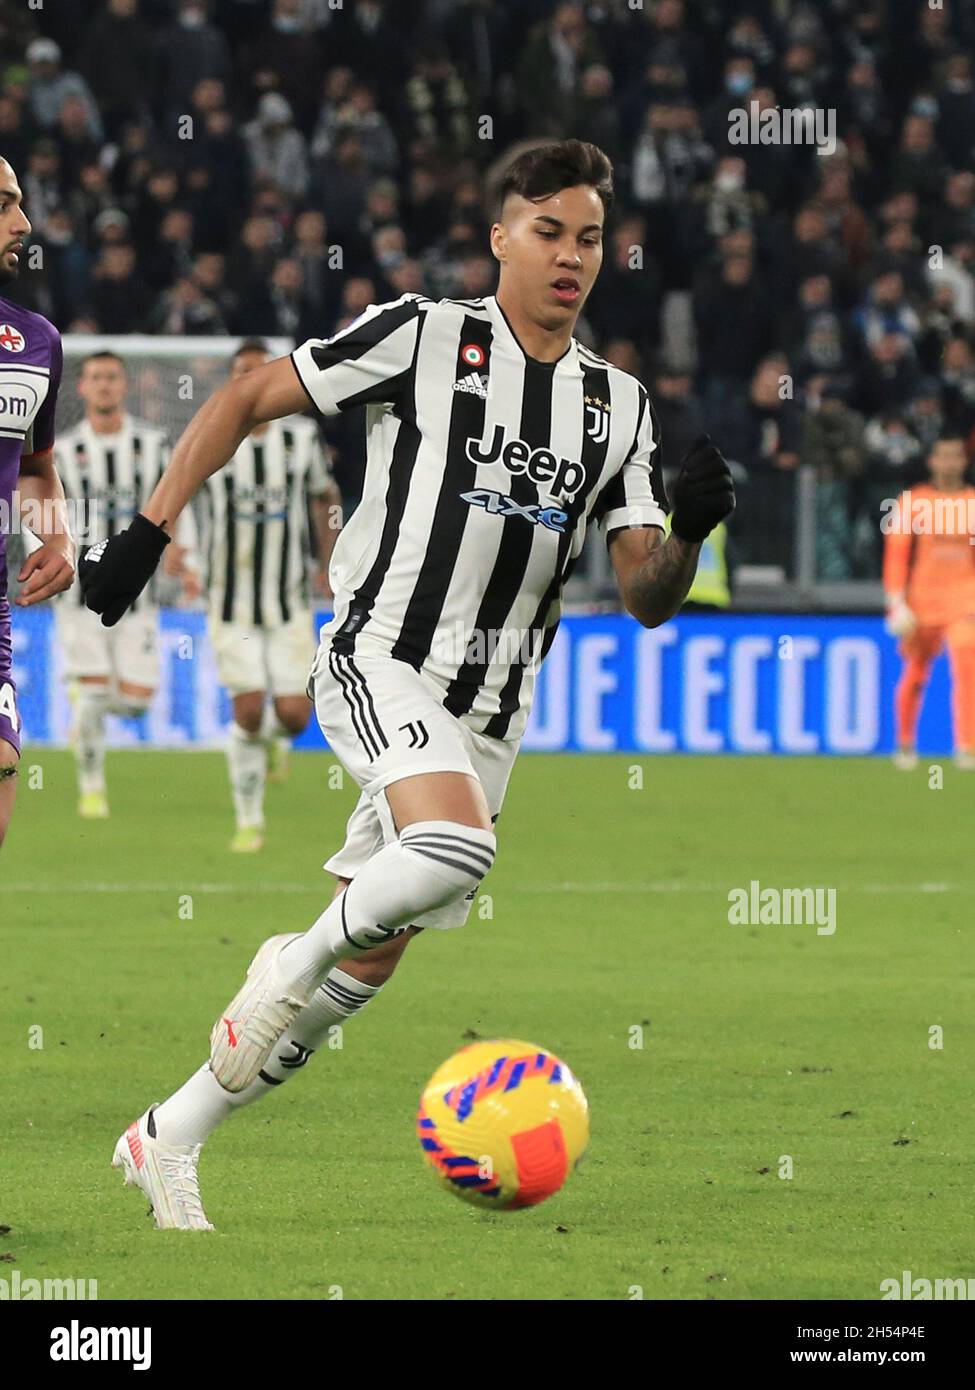 Turin, Italy. 06th Nov, 2021. Kaio Jorge (Juventus FC) during Juventus FC vs ACF Fiorentina, italian soccer Serie A match in Turin, Italy, November 06 2021 Credit: Independent Photo Agency/Alamy Live News Stock Photo